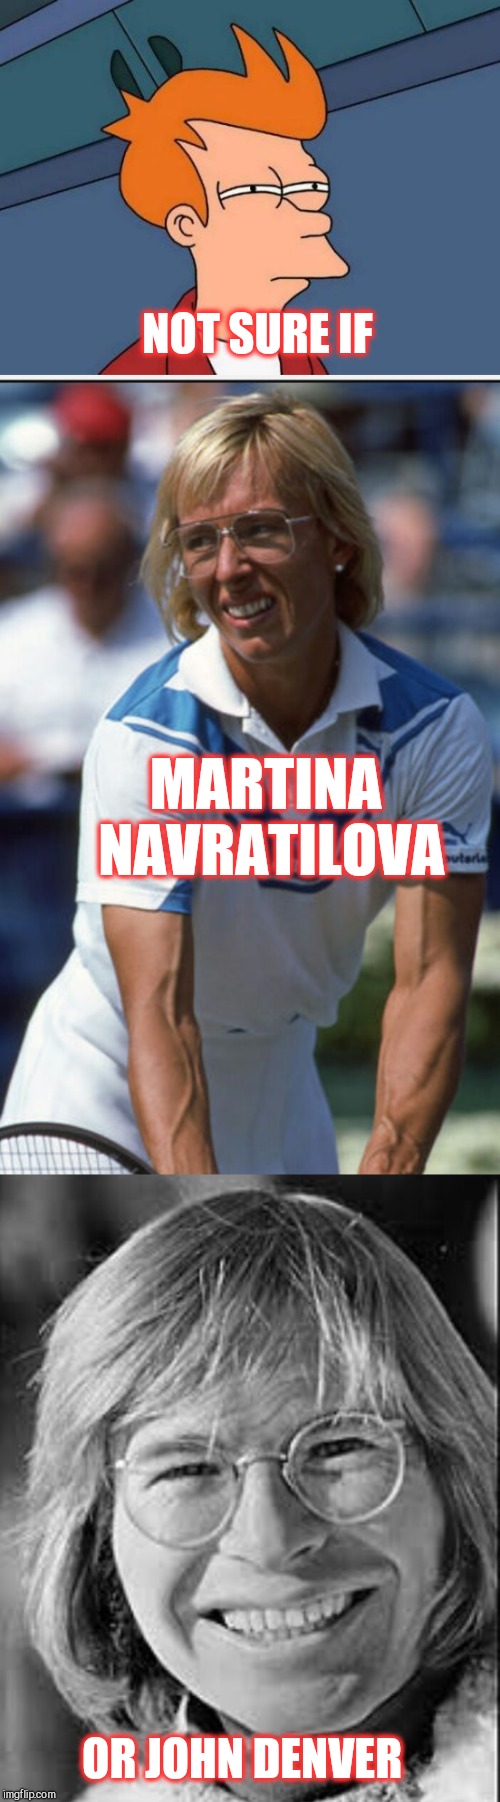 The resemblance is uncanny lol  | NOT SURE IF; MARTINA NAVRATILOVA; OR JOHN DENVER | image tagged in john denver,martina navratilova,jbmemegeek,memes,tennis | made w/ Imgflip meme maker